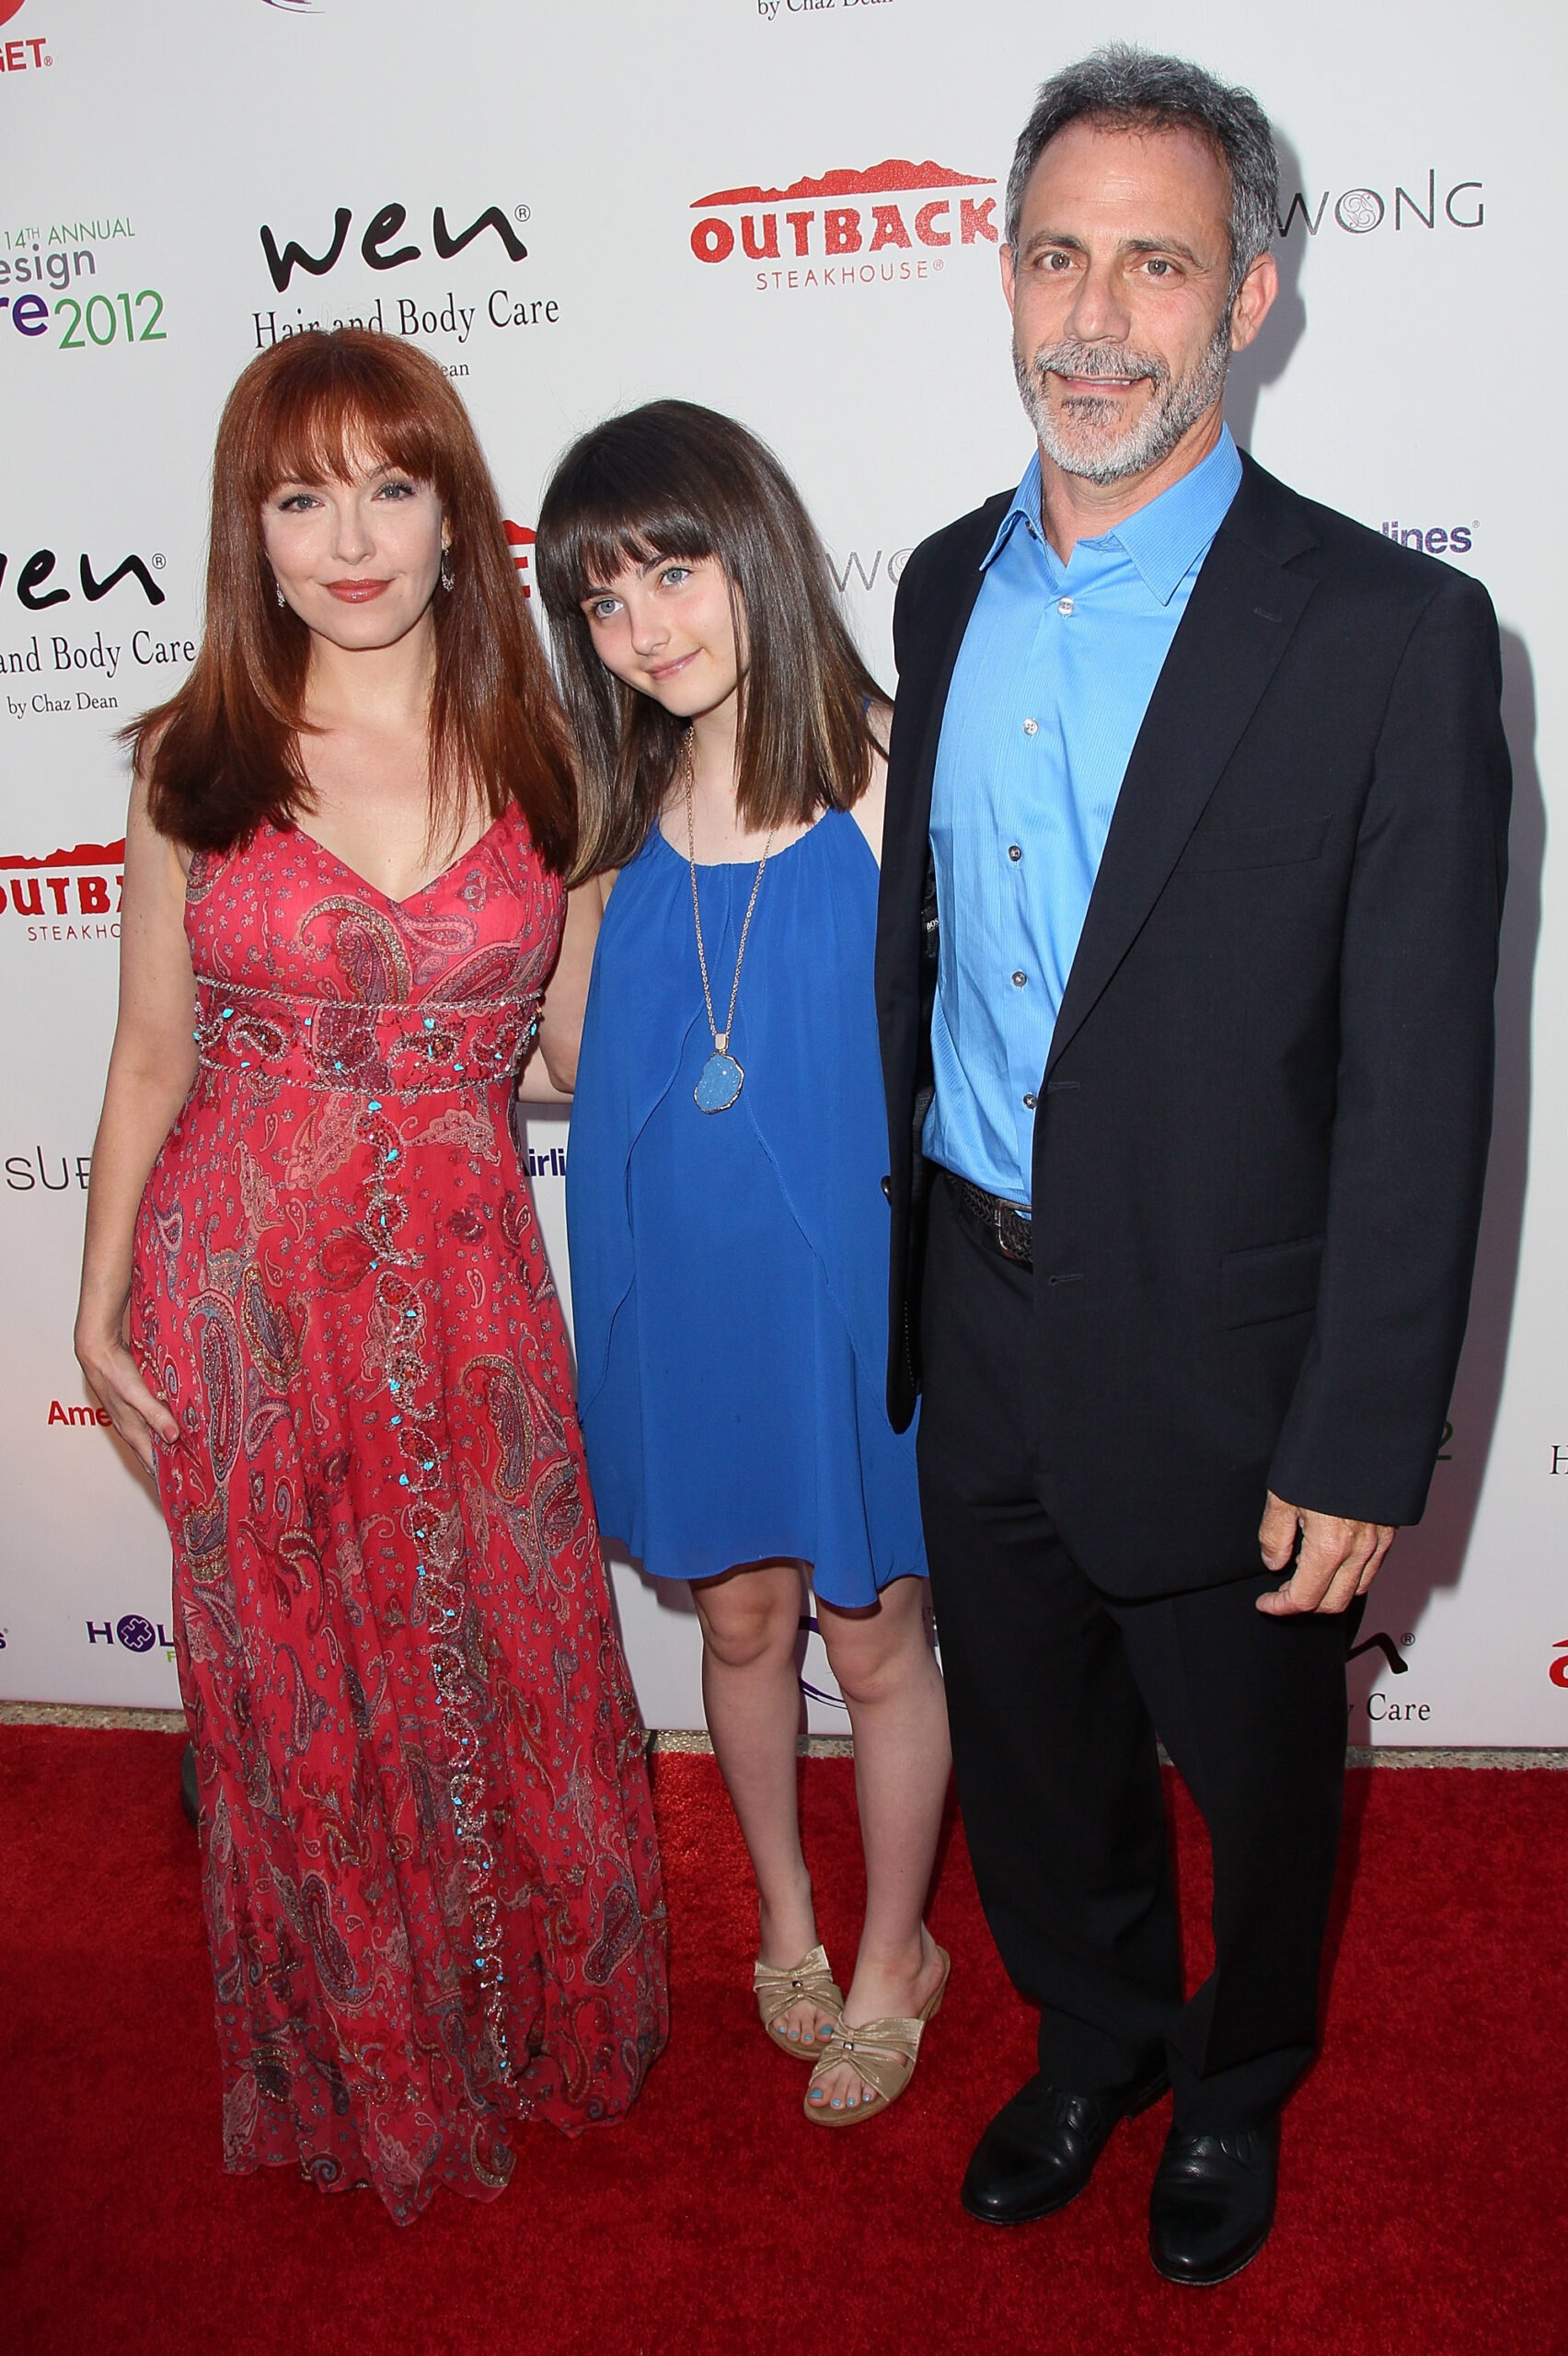 Amy Yasbeck, Stella Ritter, and guest at the 14th Annual DesignCare event in Malibu, California on July 21, 2012 | Source: Getty Images